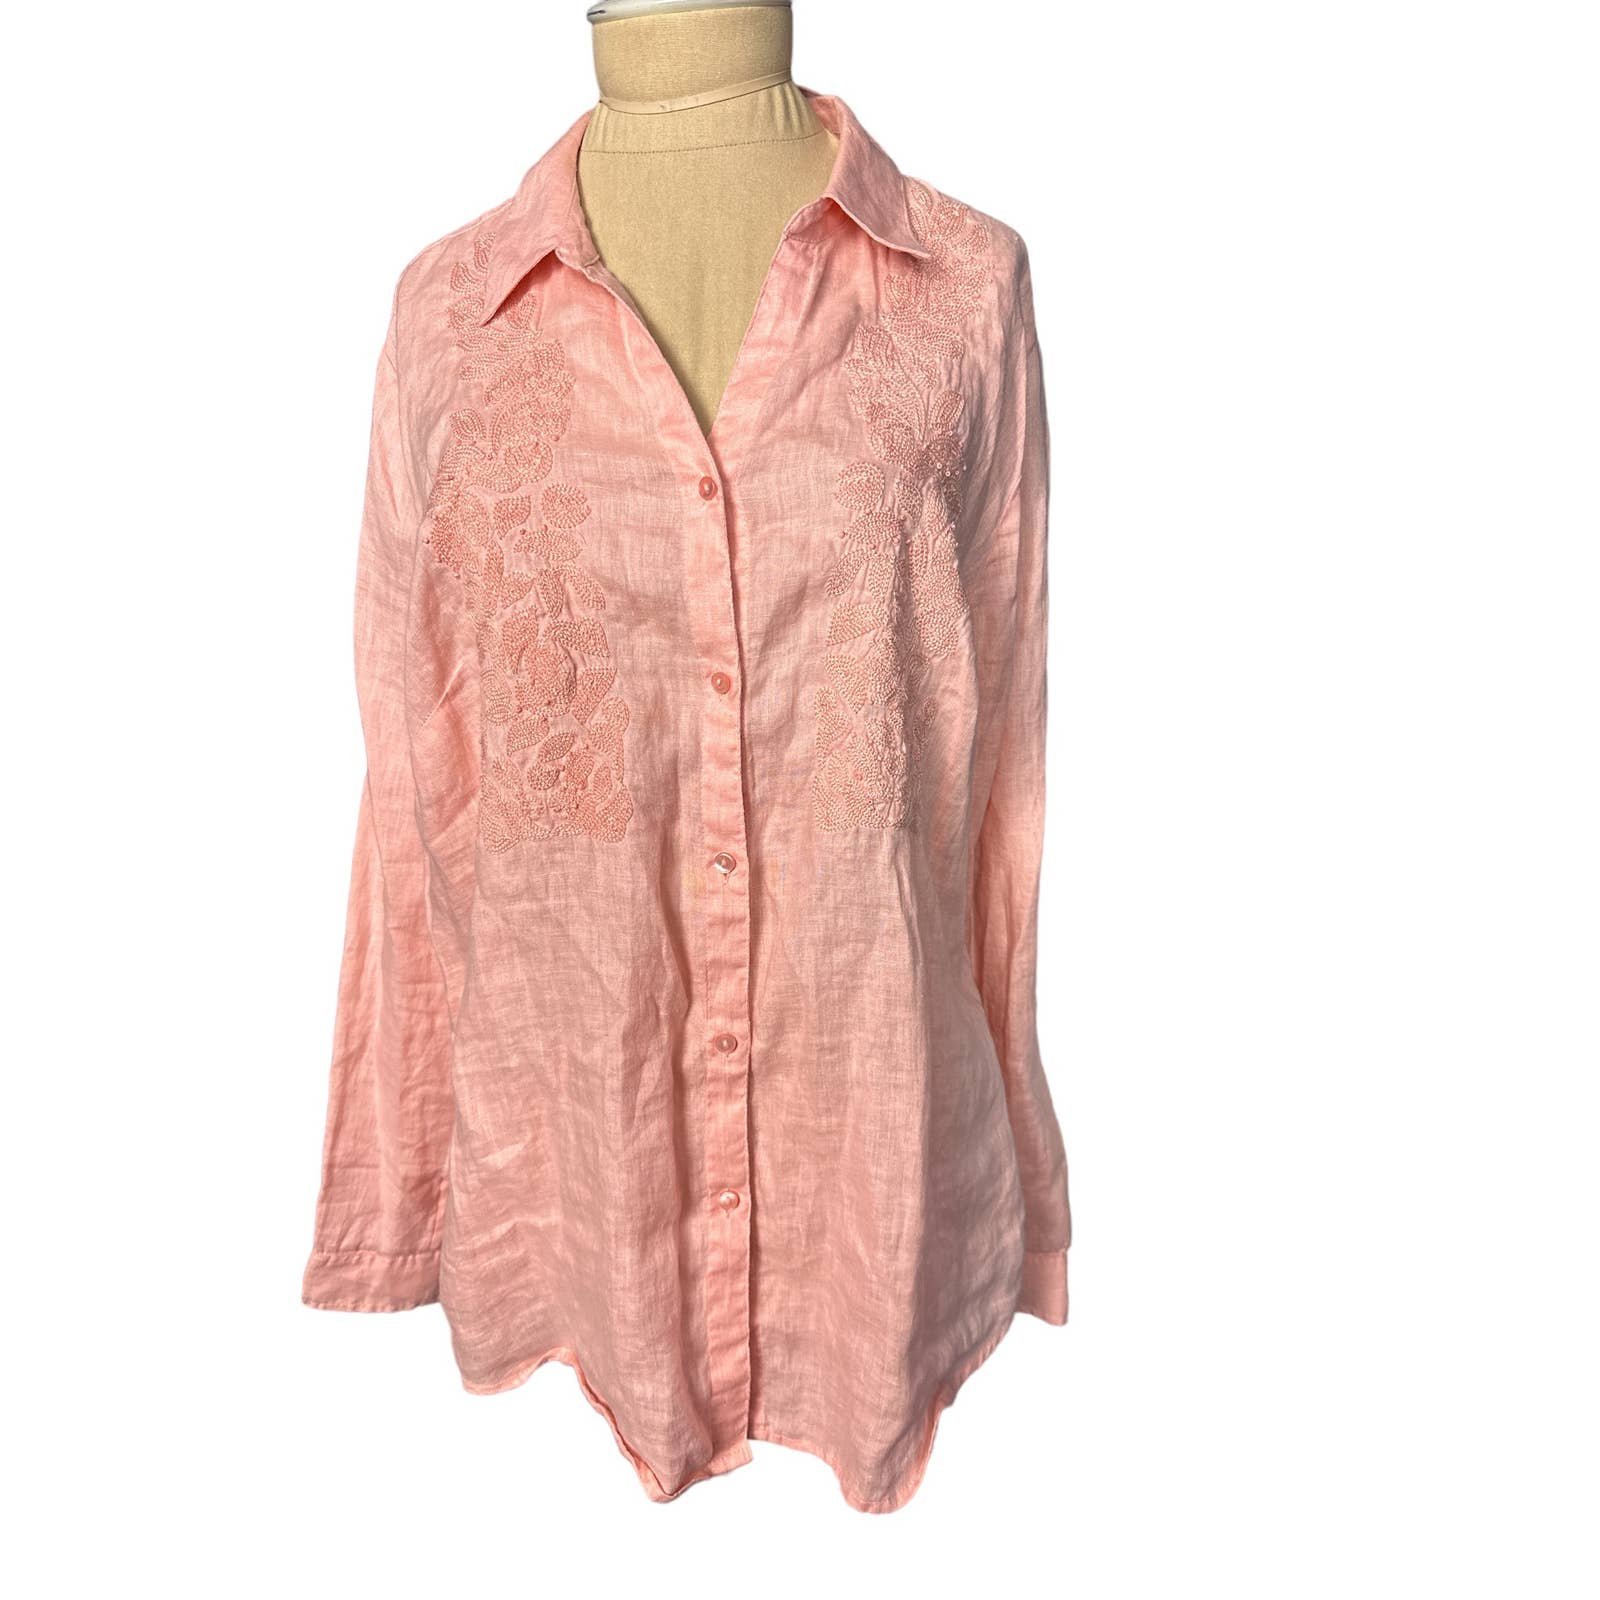 The Best Seller Charter Club Coral Pink Linen Embroider